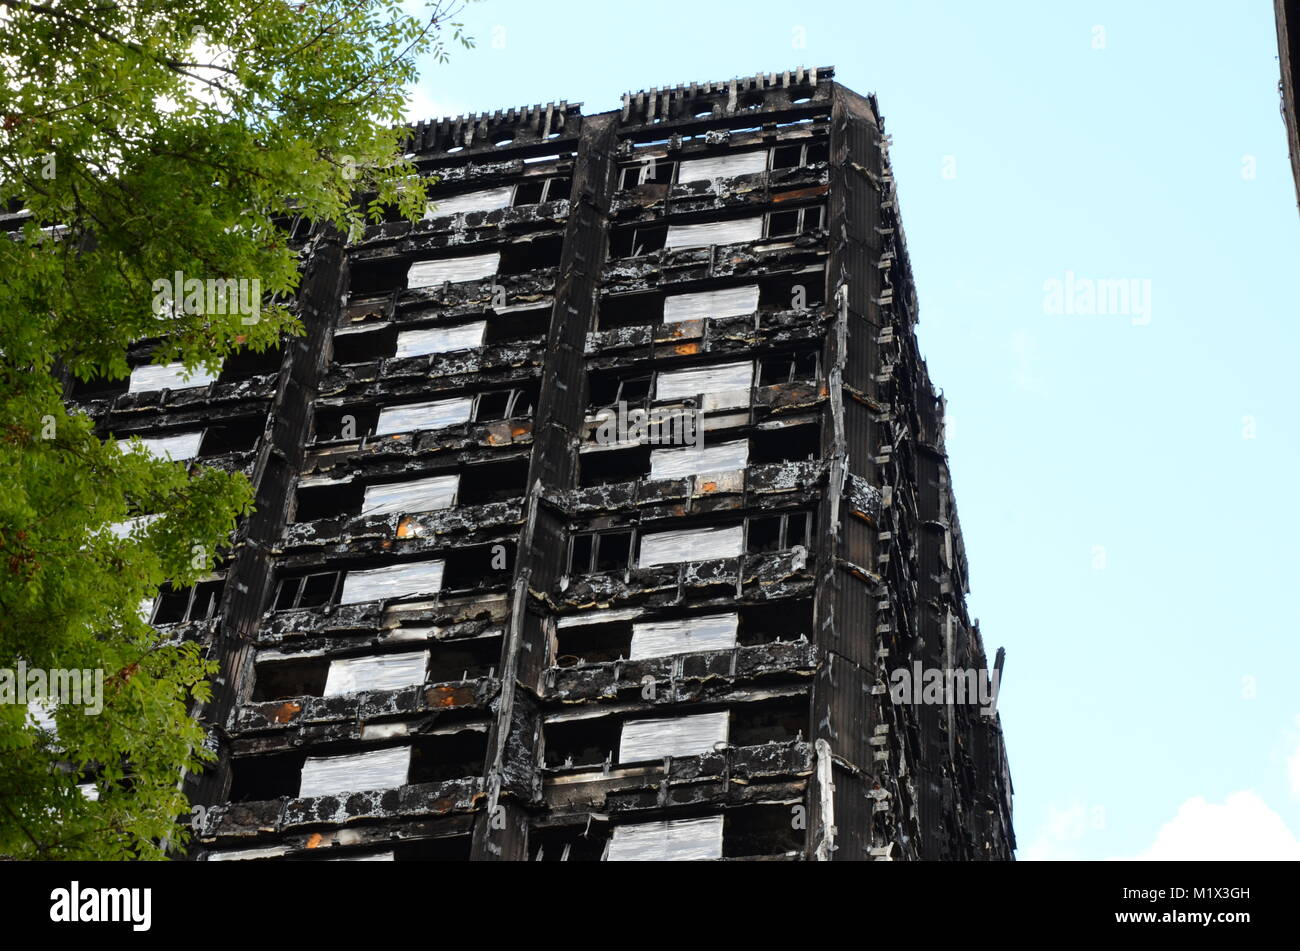 Grenfell Tower, fire, disaster, London, fire damage, High rise flats Stock Photo